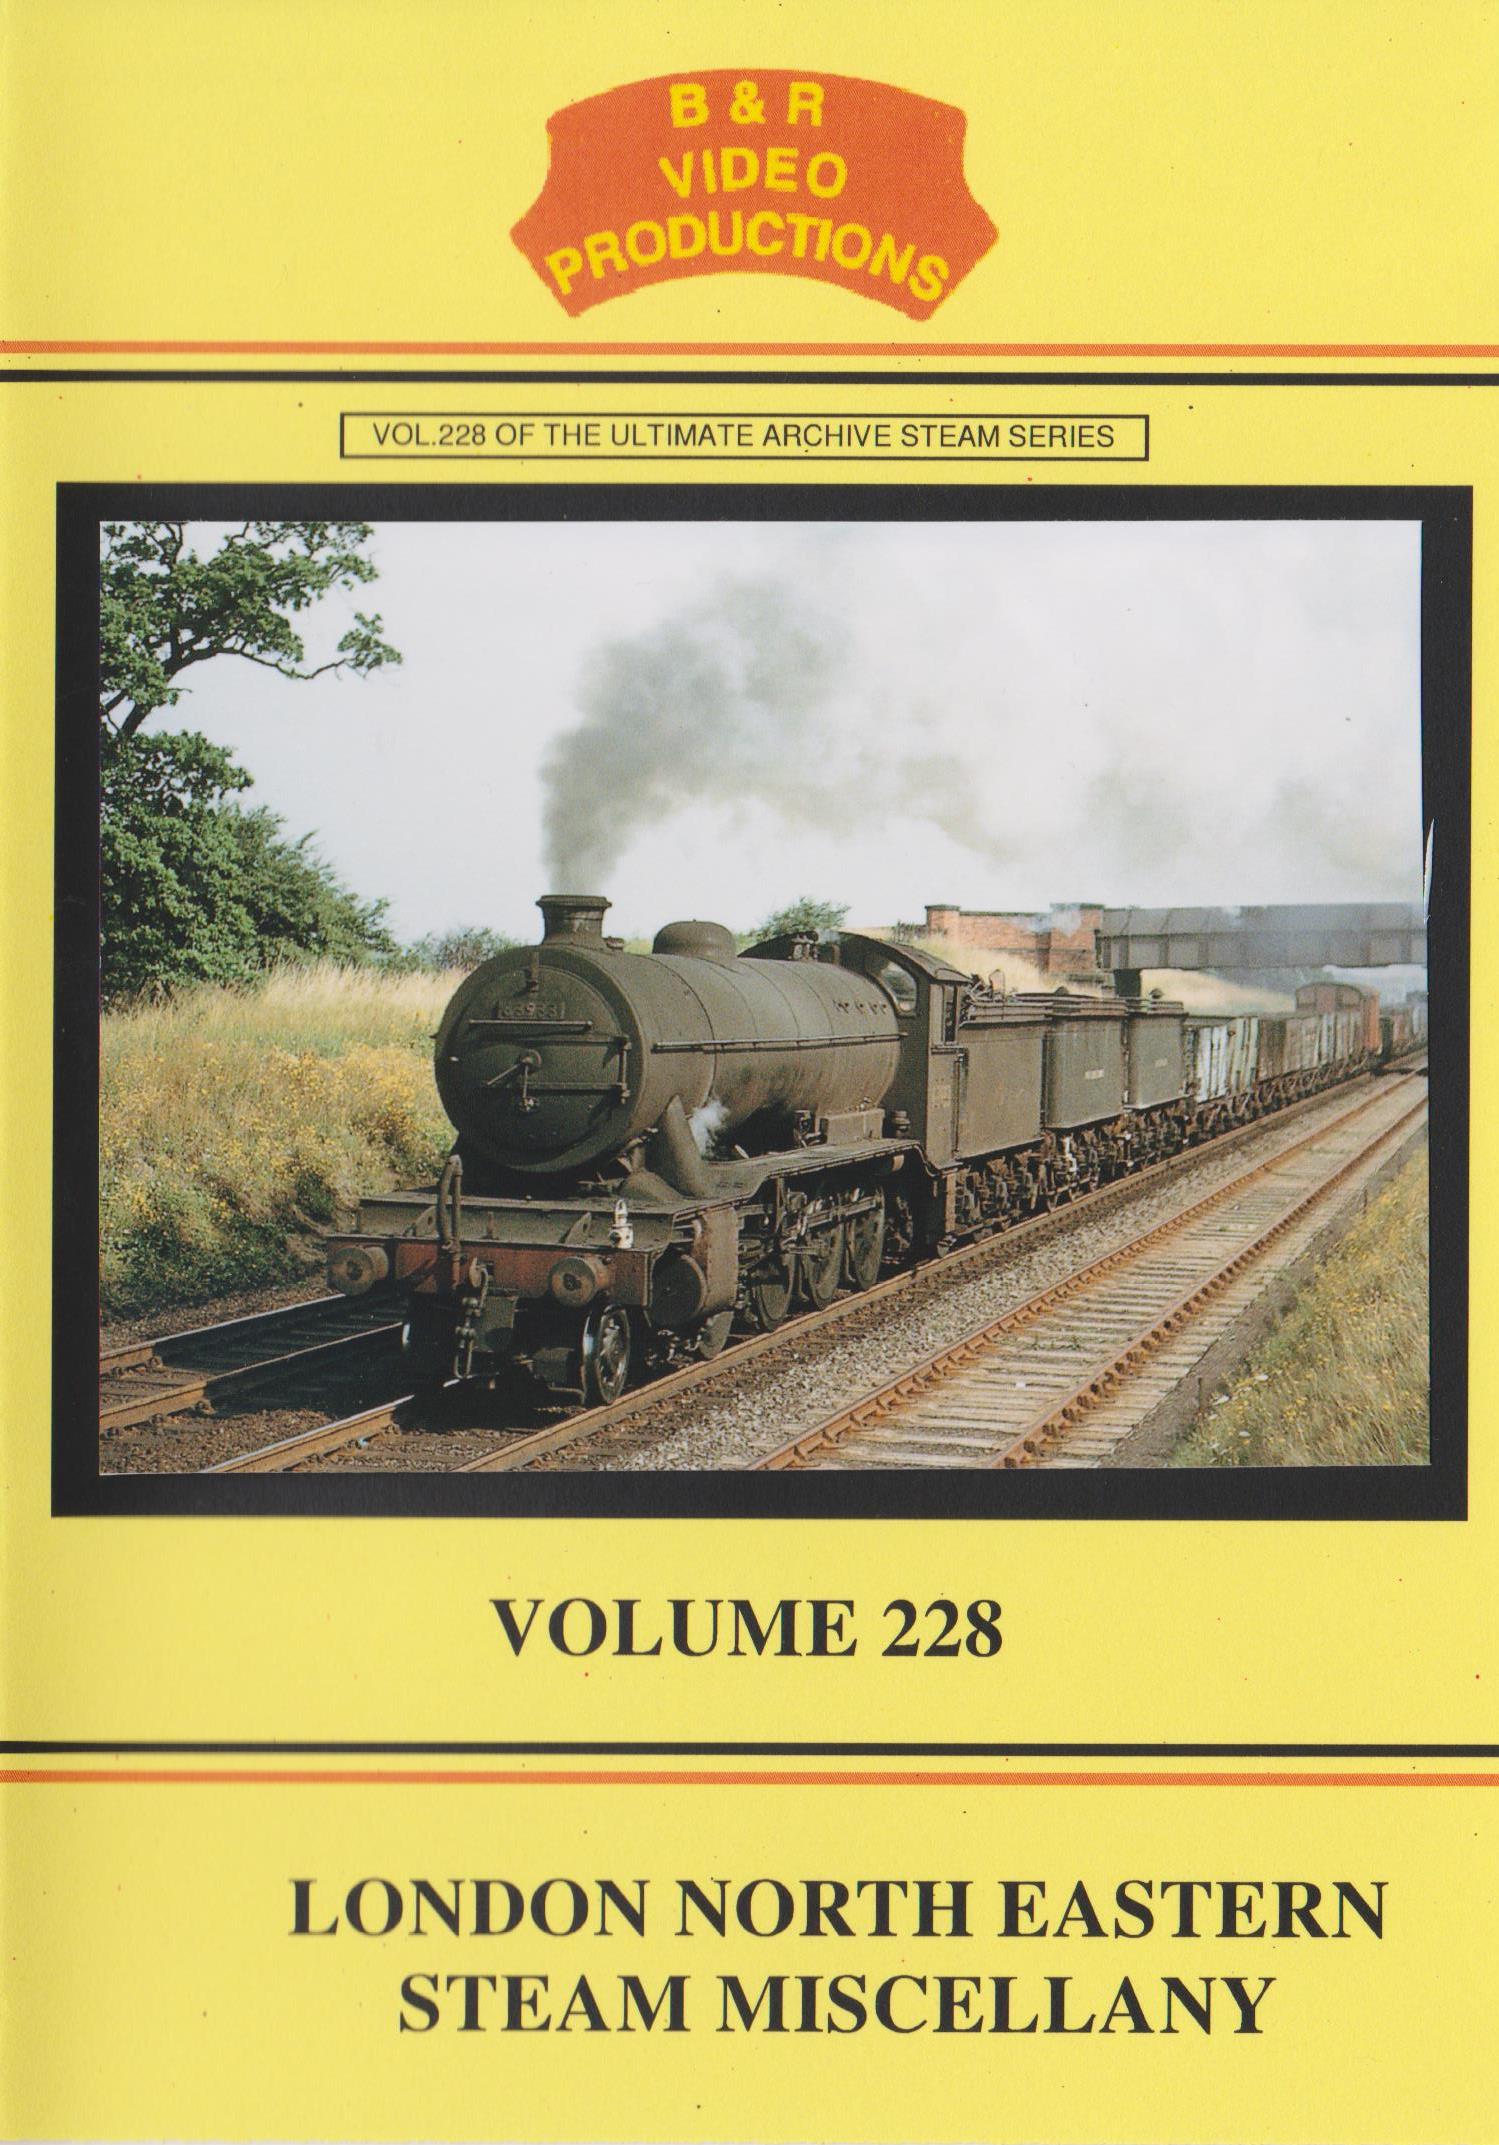 B & R Video Productions Vol 228 - London North Eastern steam miscellany 